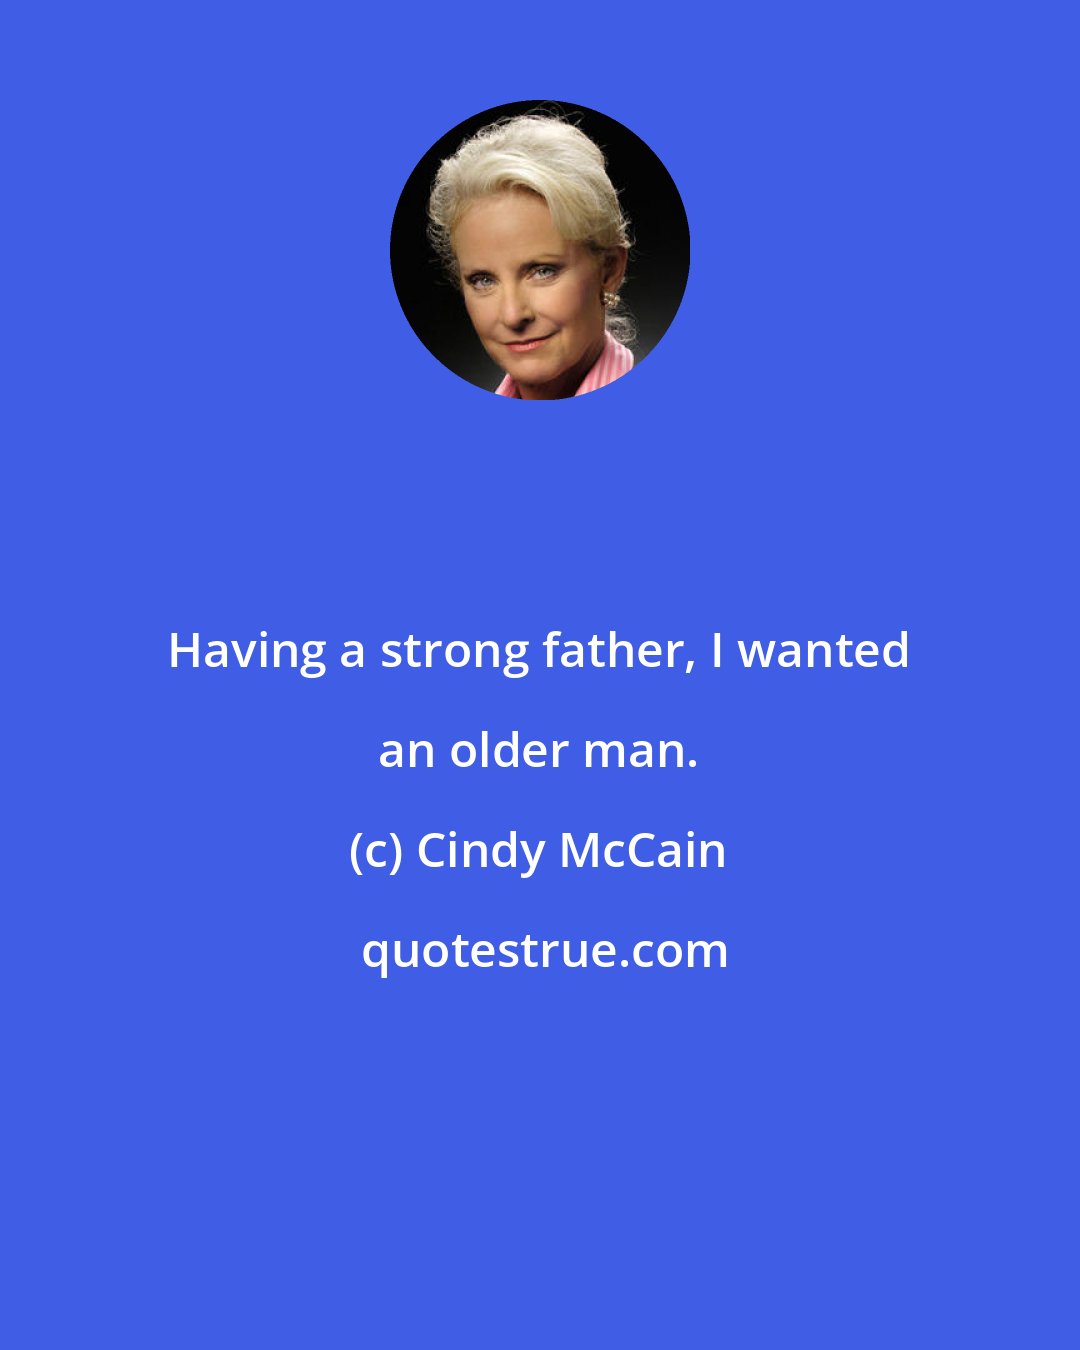 Cindy McCain: Having a strong father, I wanted an older man.